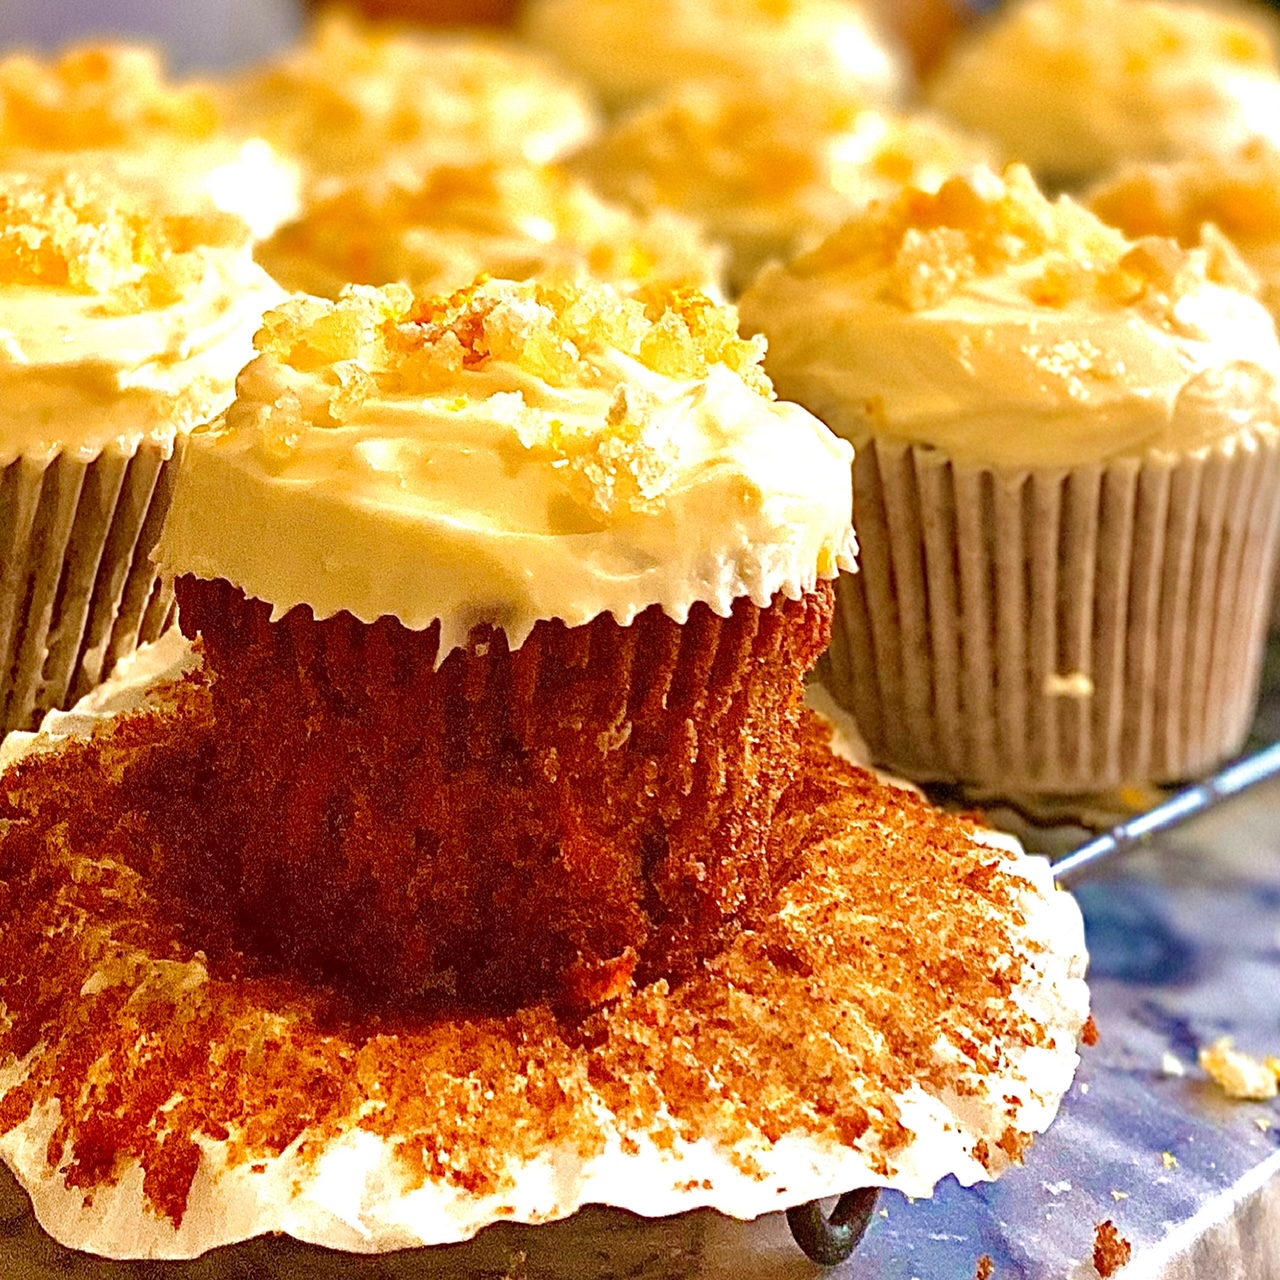 Lemon and ginger carrot cake cupcakes on a baking wrack. The front cake as the cake case turned down to show the carrot cake below contrasted with the pale cream cheese frosting.